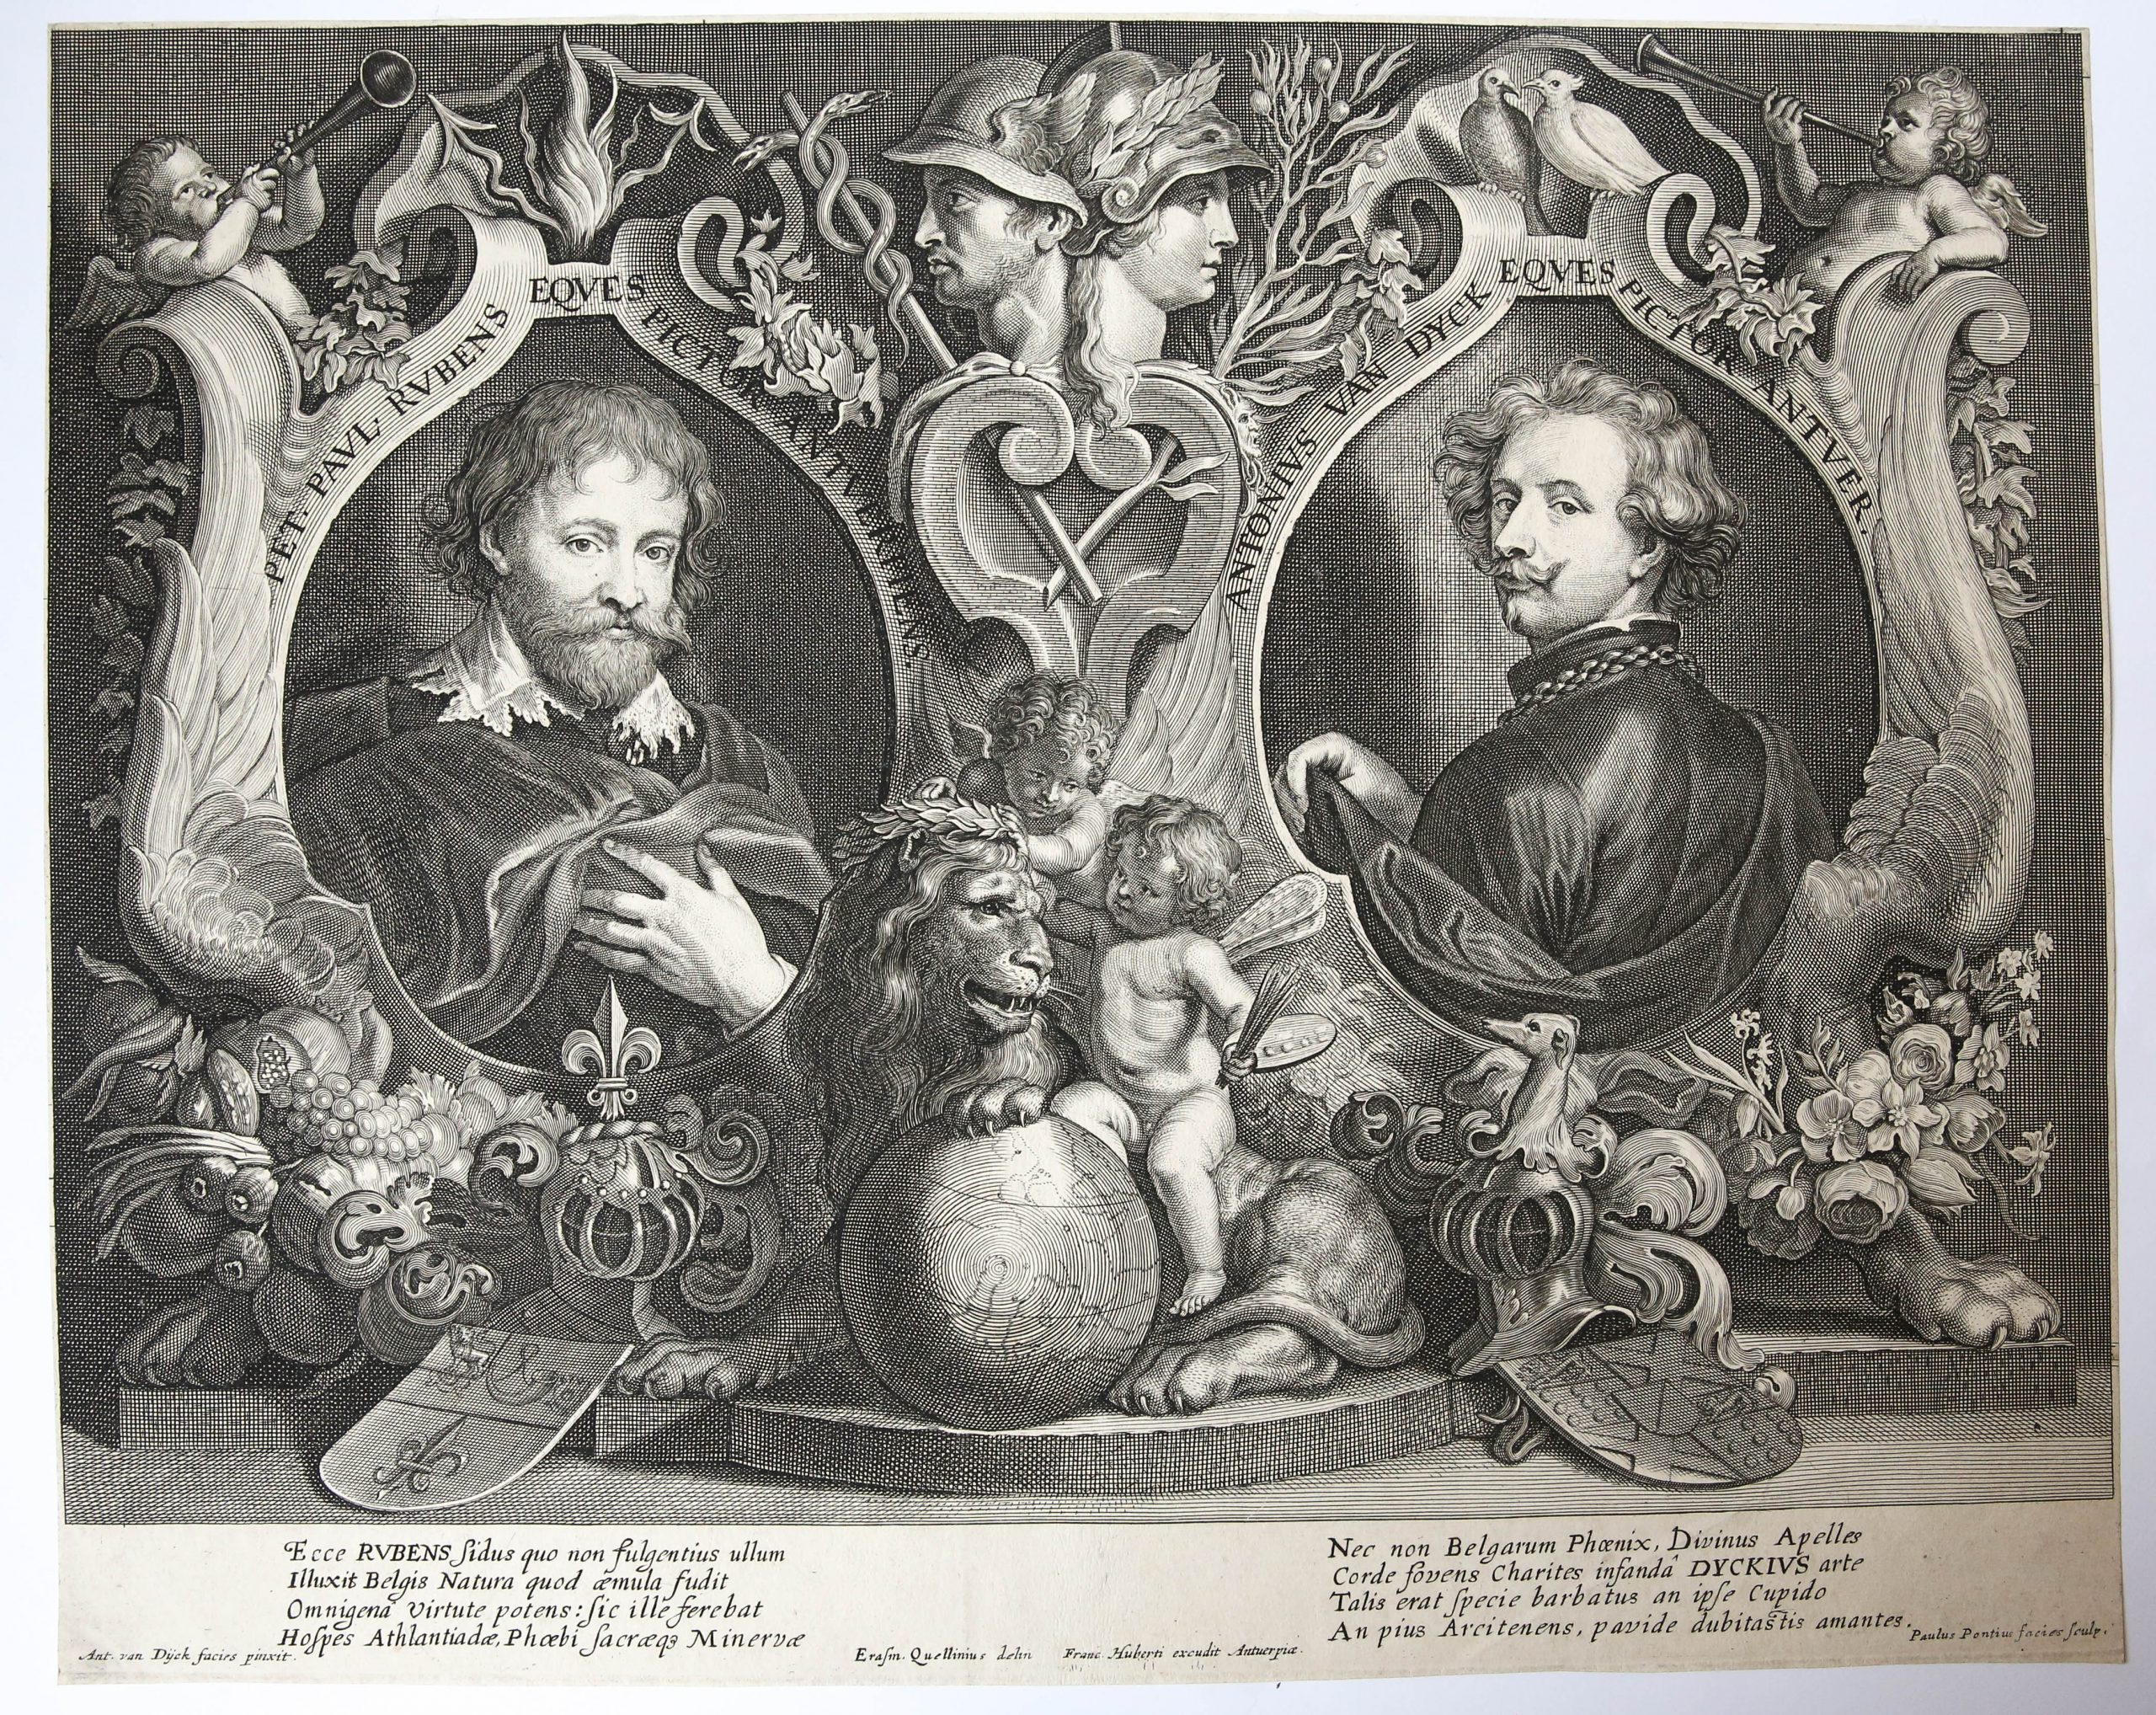 [Antique print, engraving] Portraits of Peter Paul Rubens and Anthony van Dyck. ca. 1618-1658.